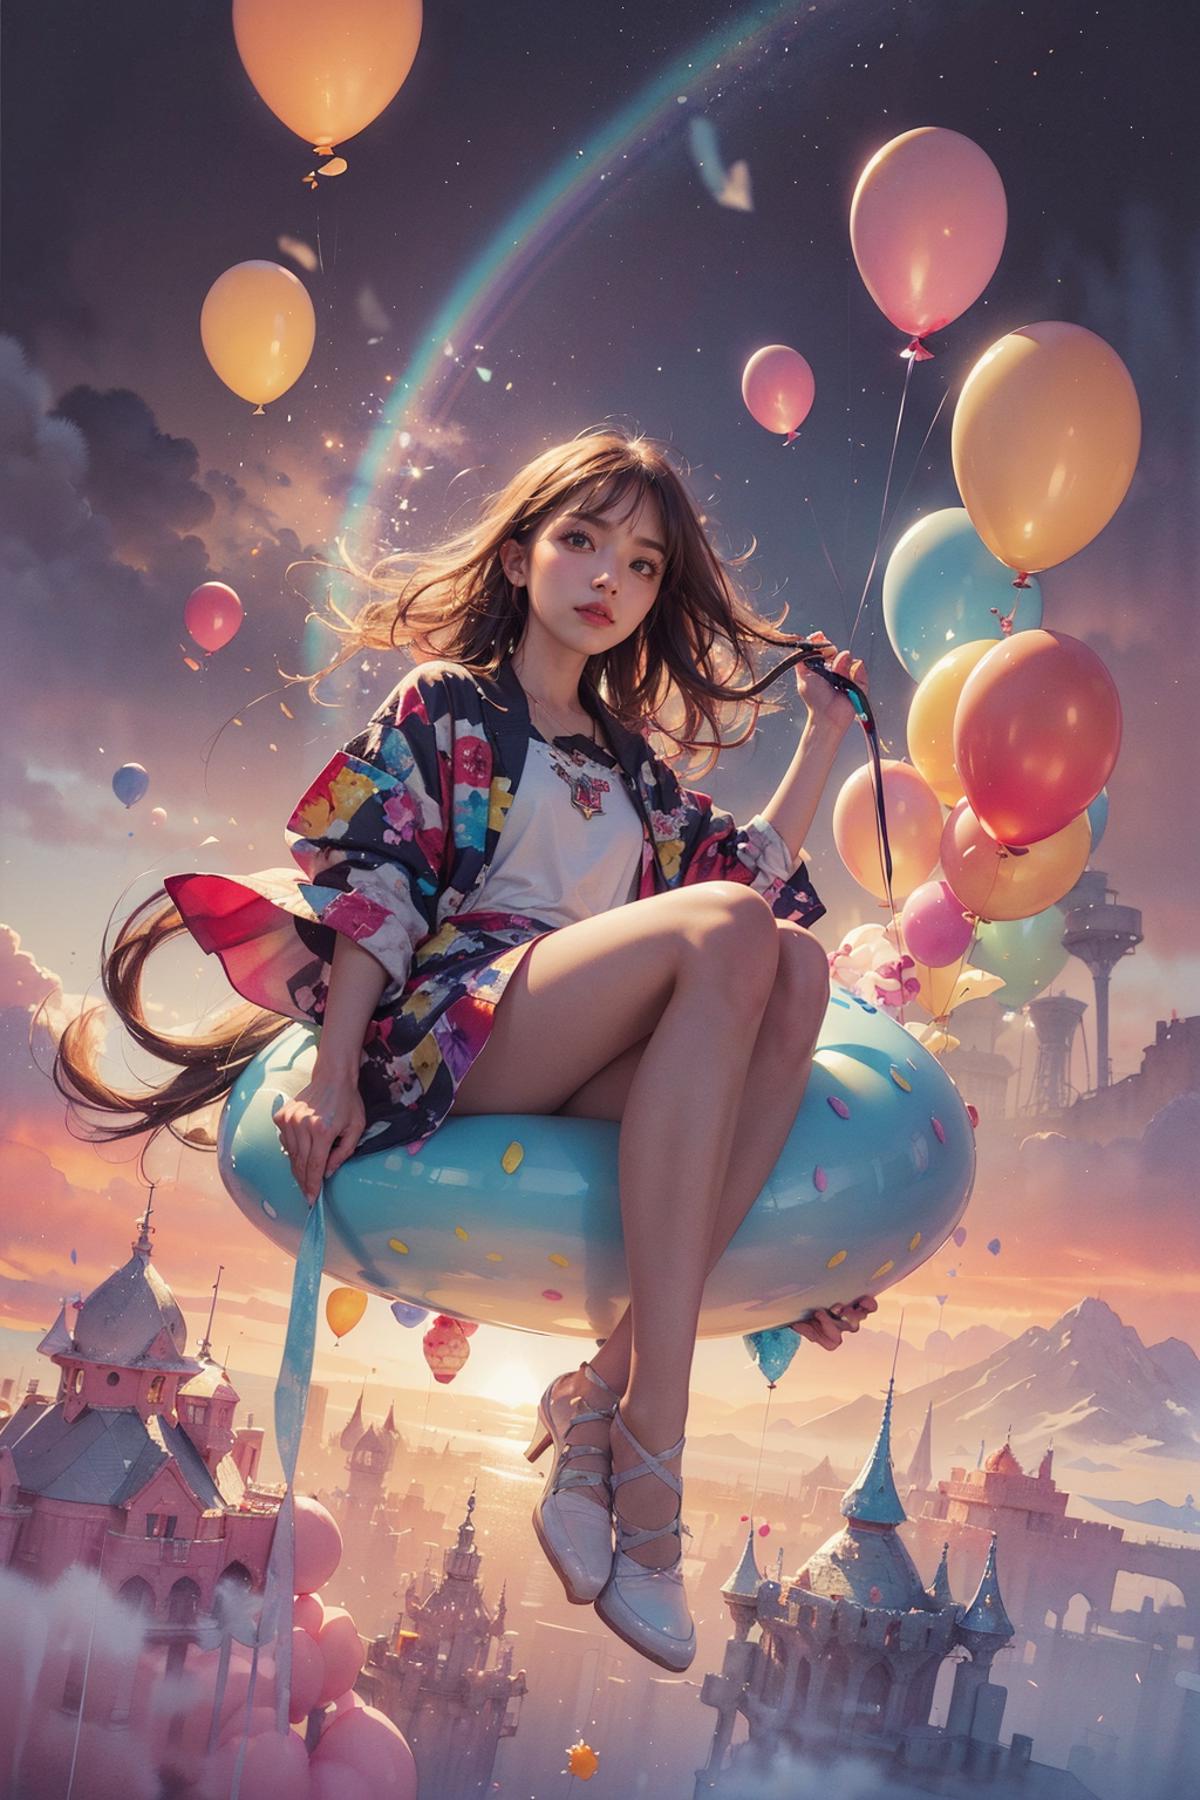 A woman sitting in a giant donut surrounded by balloons.